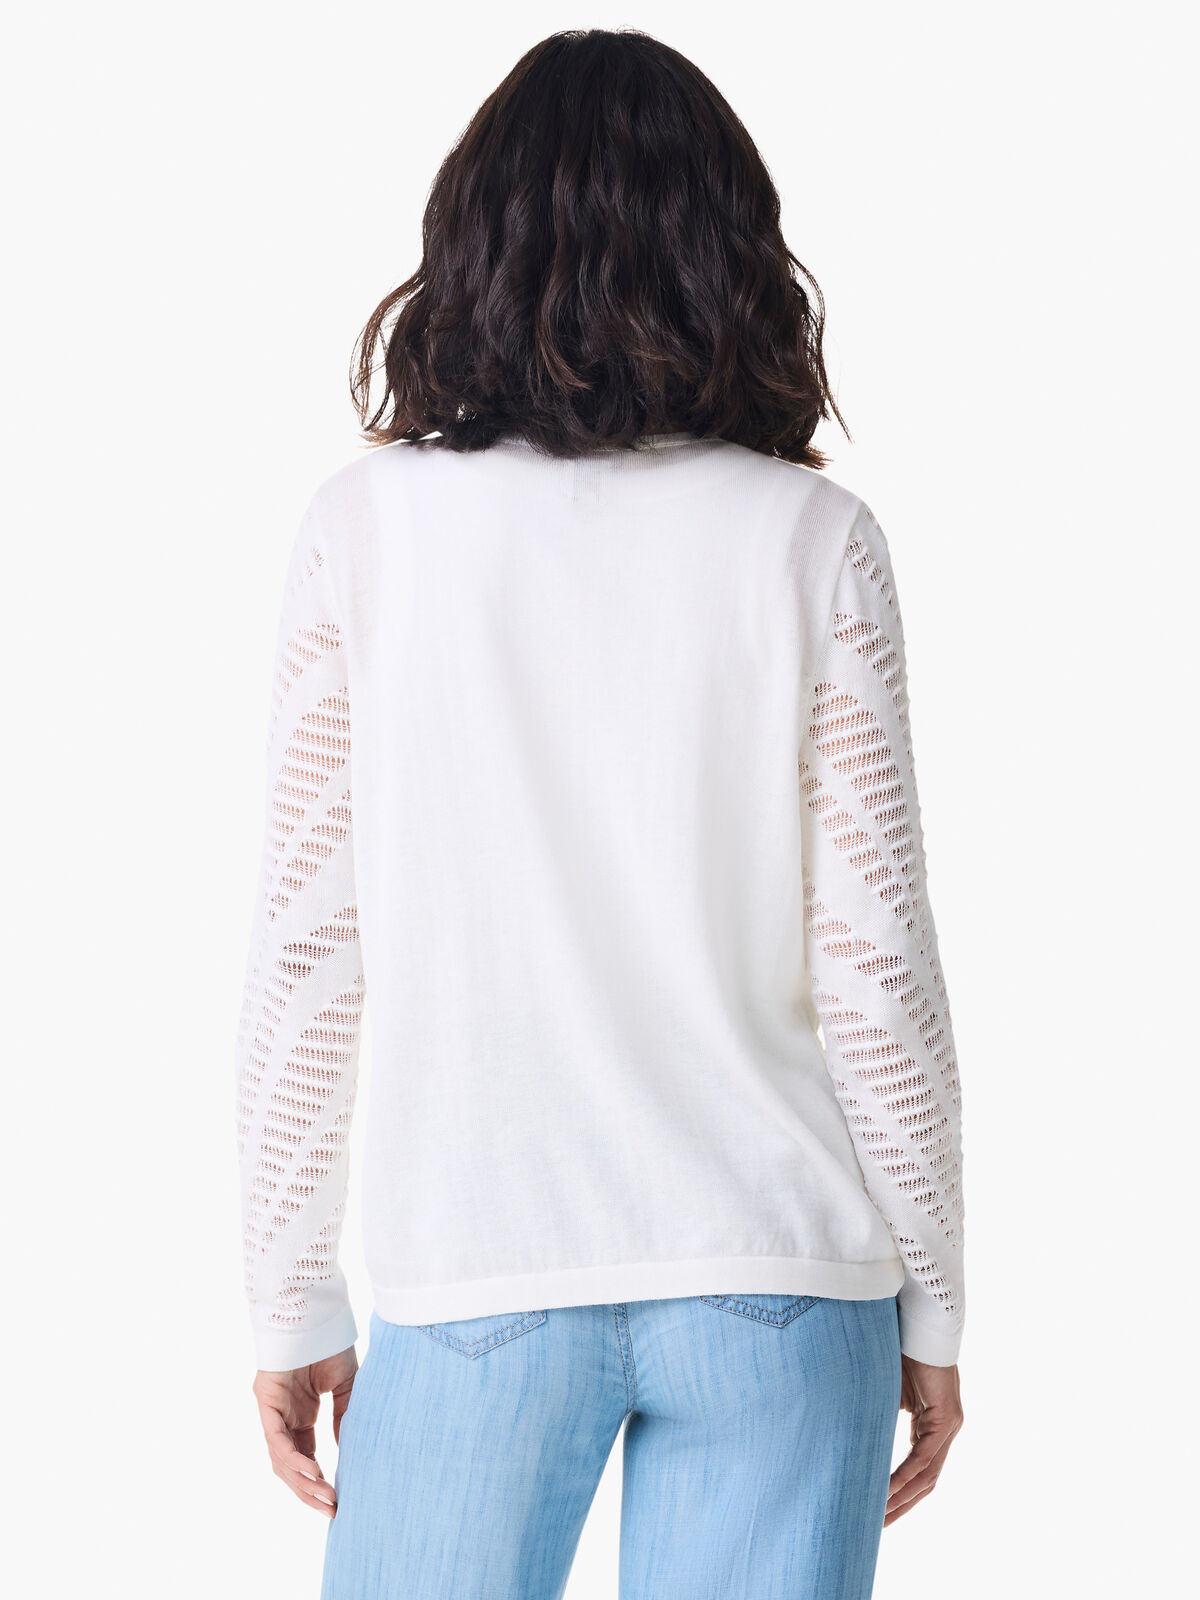 Placed Pointelle Sweater